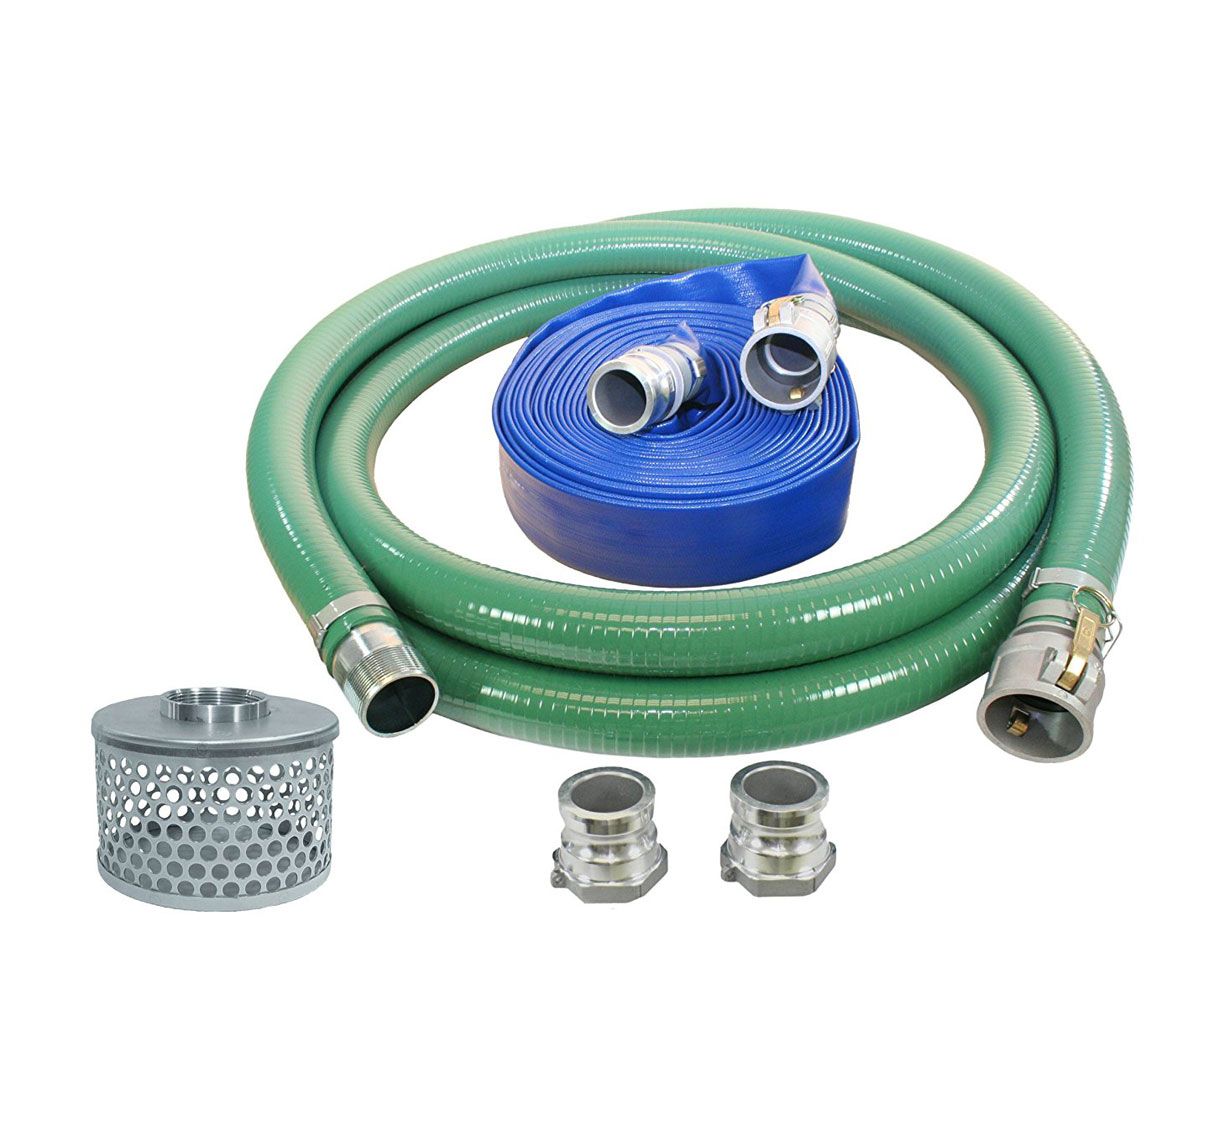 Yamamoto Hose coupler kit for WP50 water pump Plastic 2 inch with packing. 